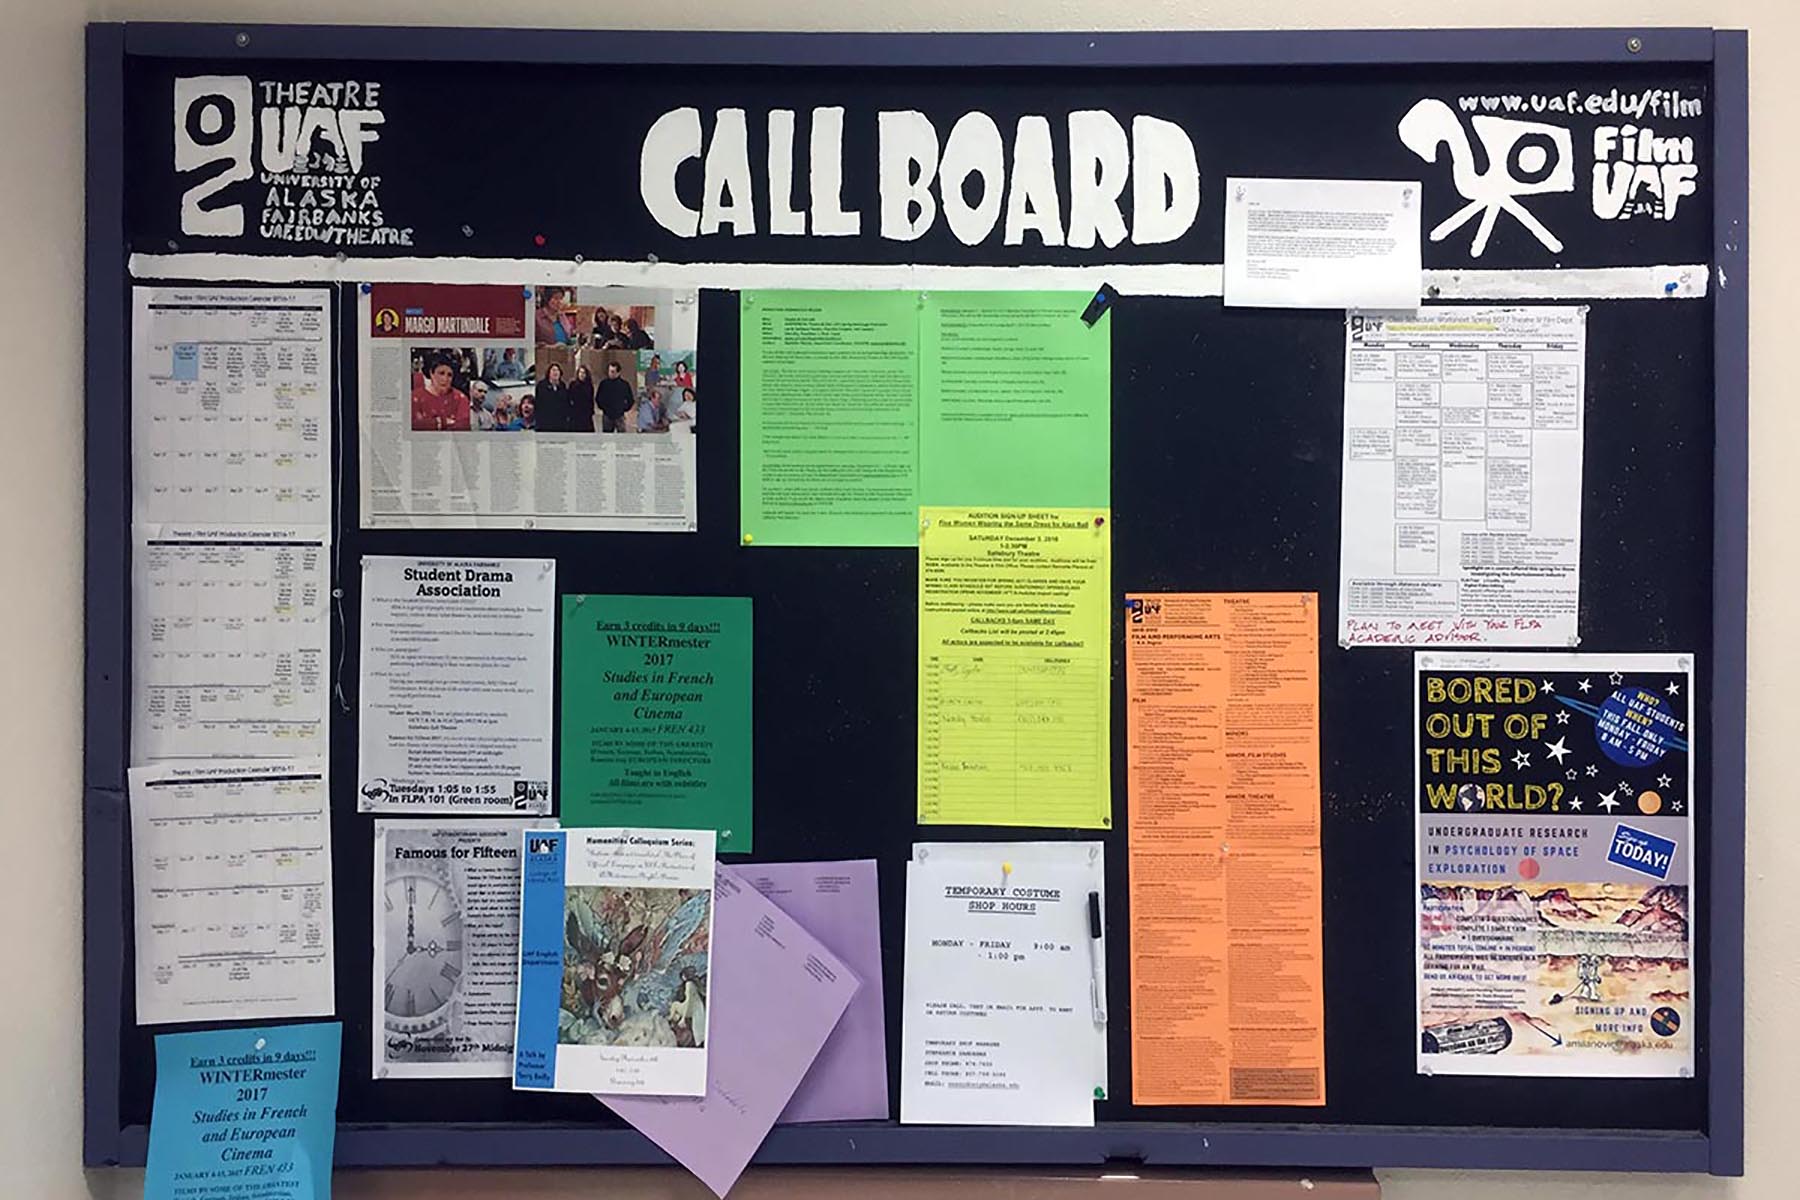 Callboard with flyers advertising upcoming auditions and events